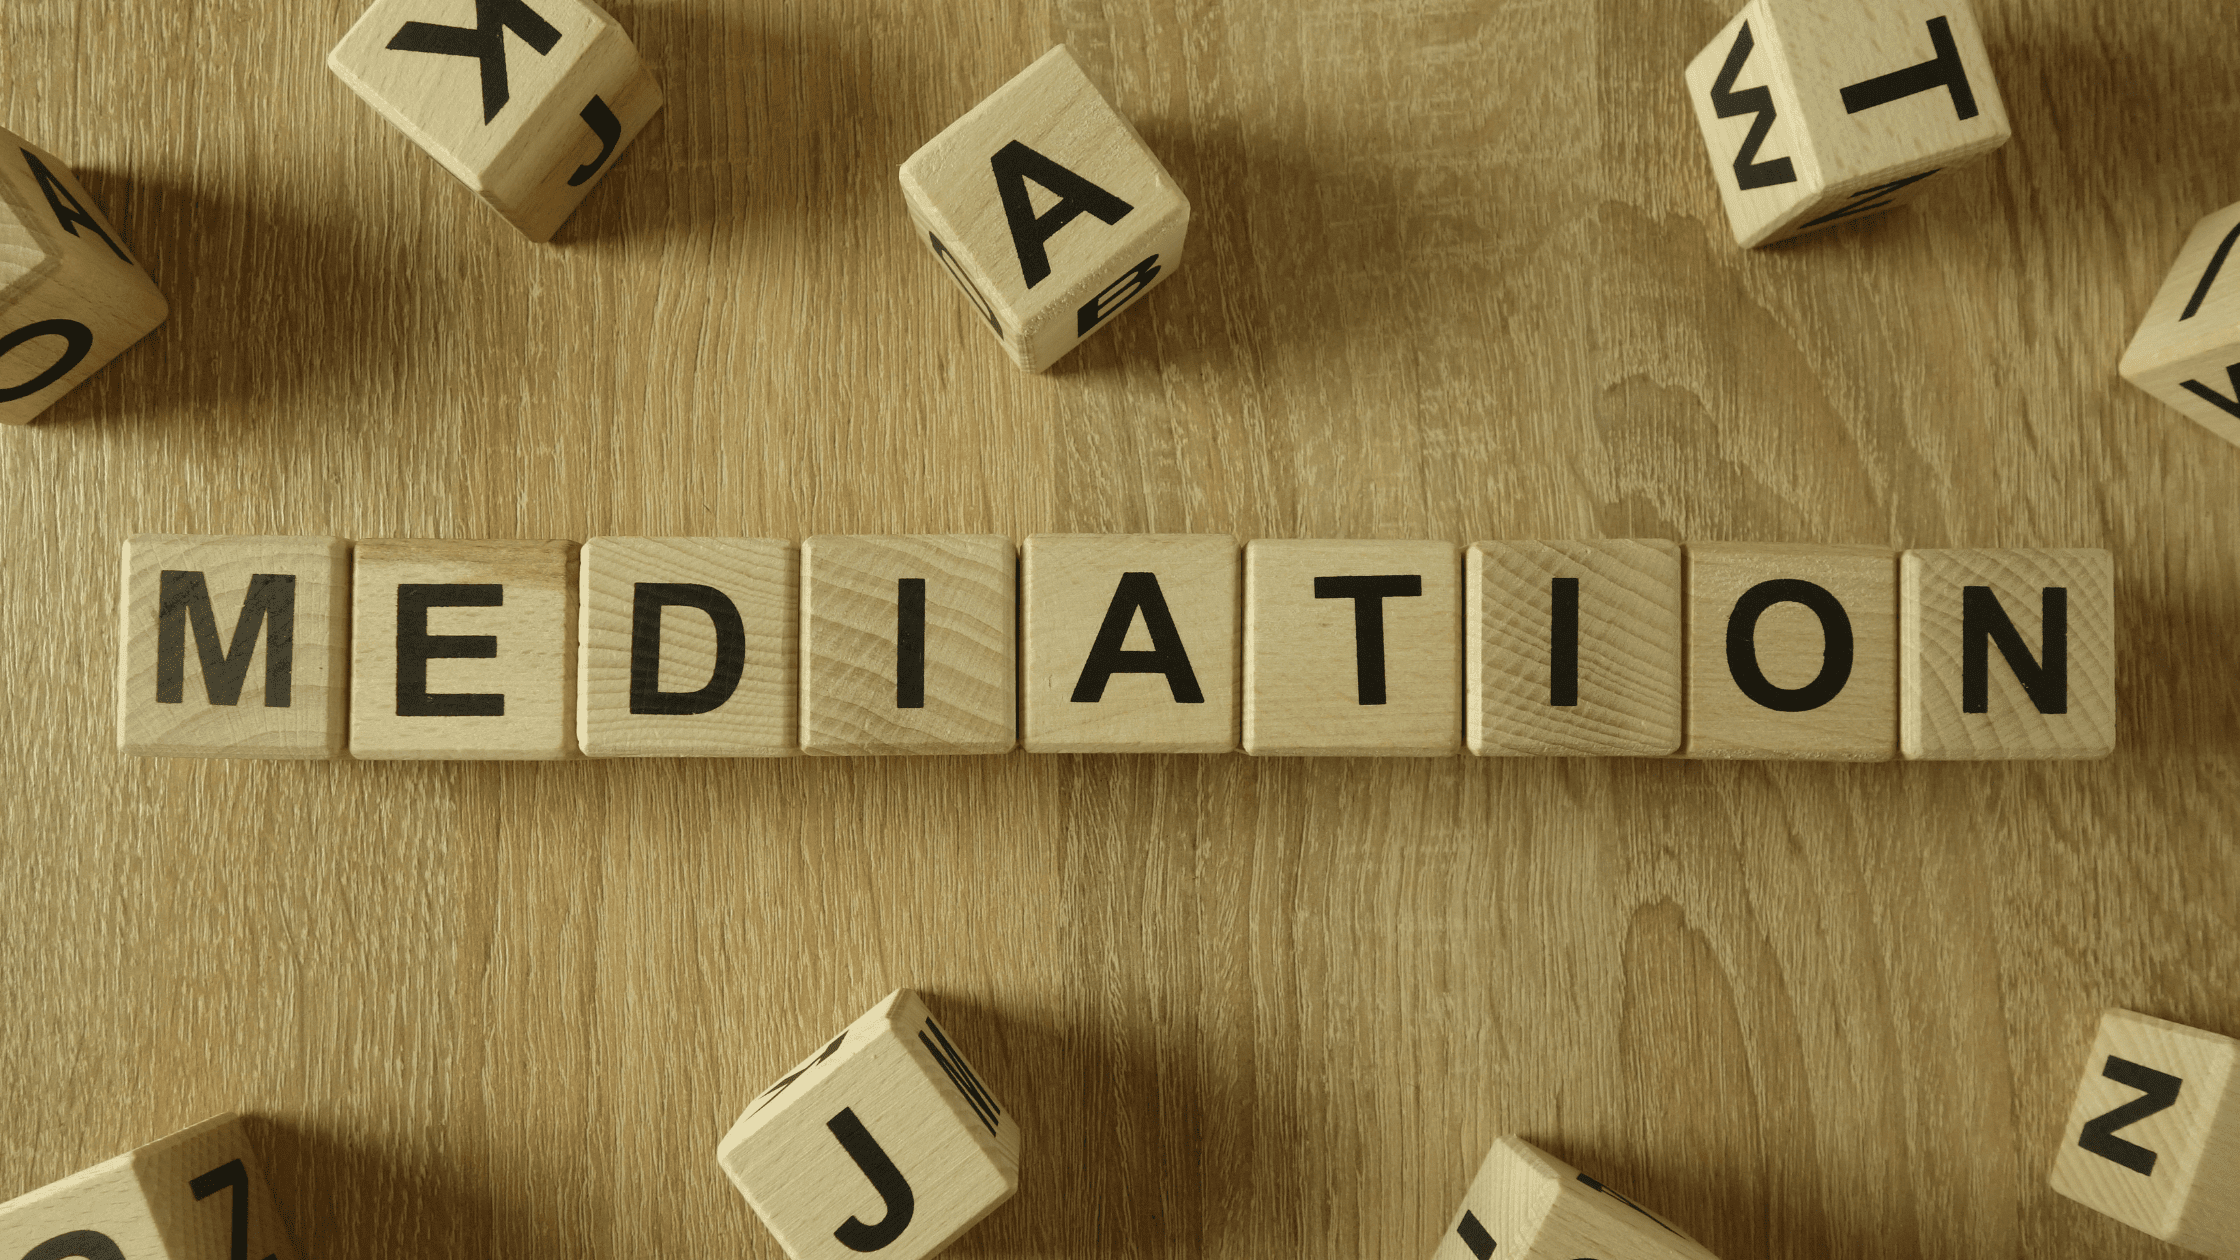 research paper on mediation in india